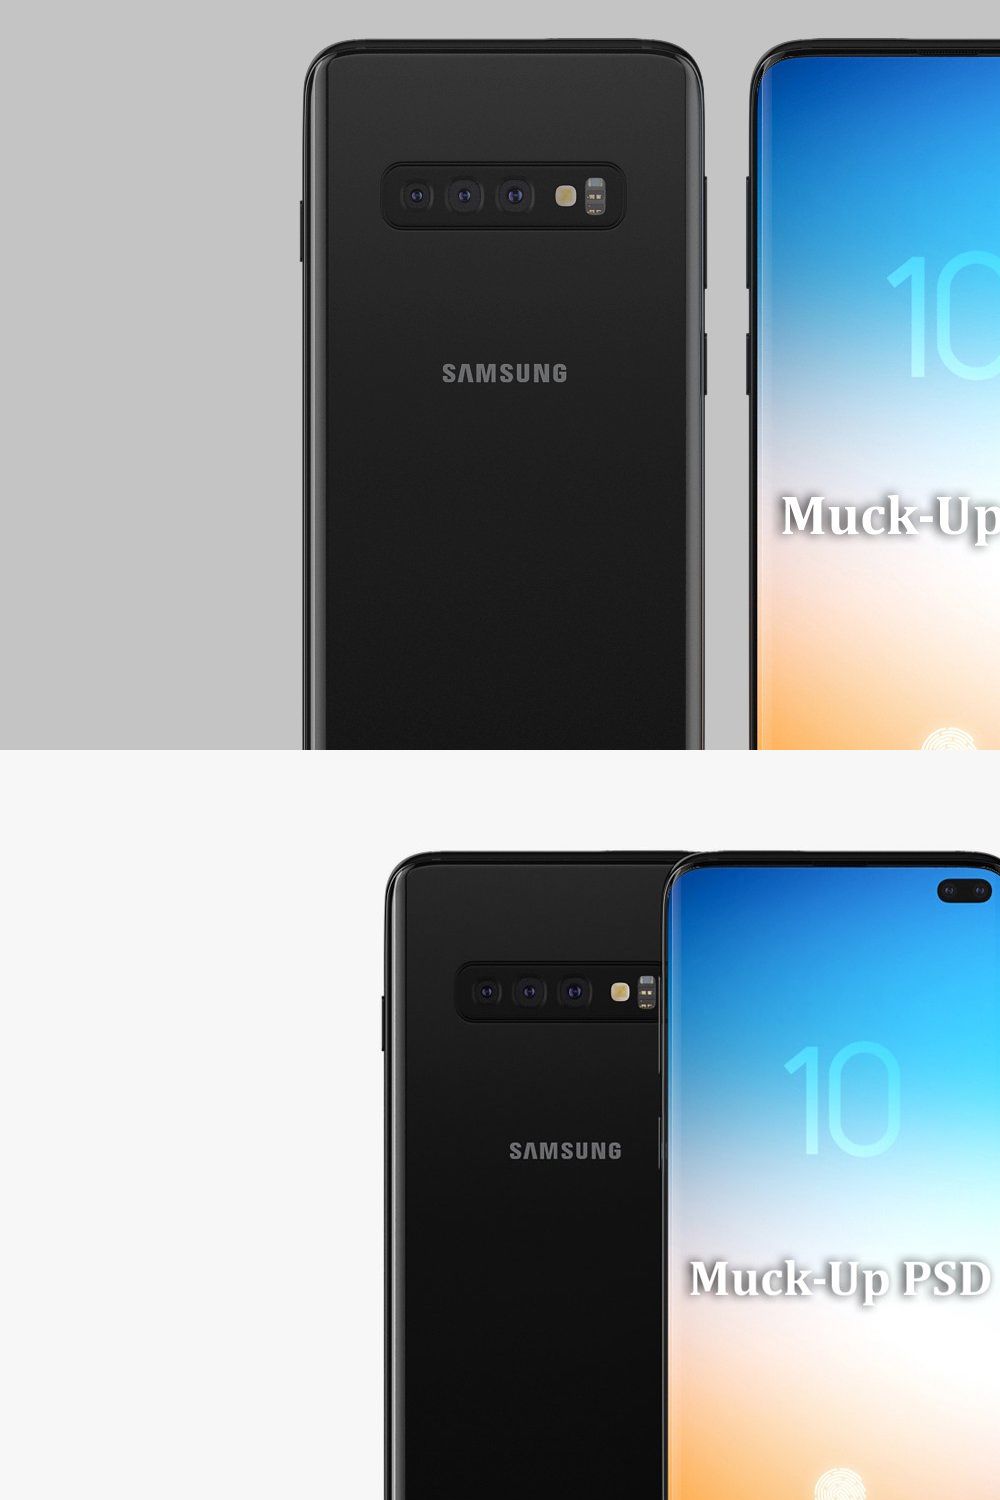 Samsung galaxy S10 Plus mock-up pinterest preview image.